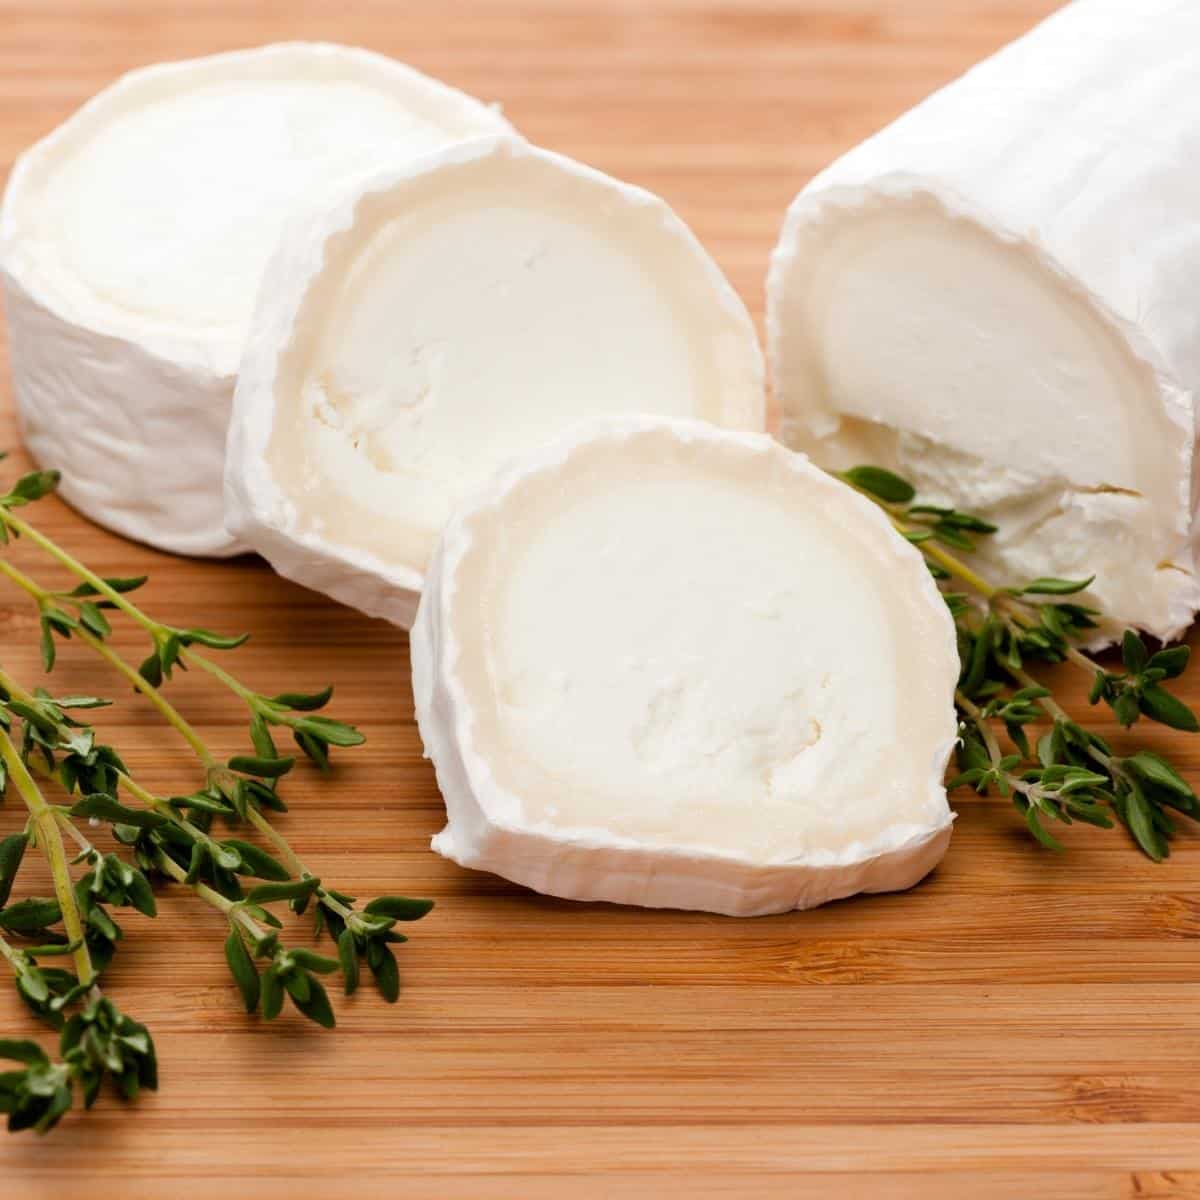 Slices of goat cheese for feezing.